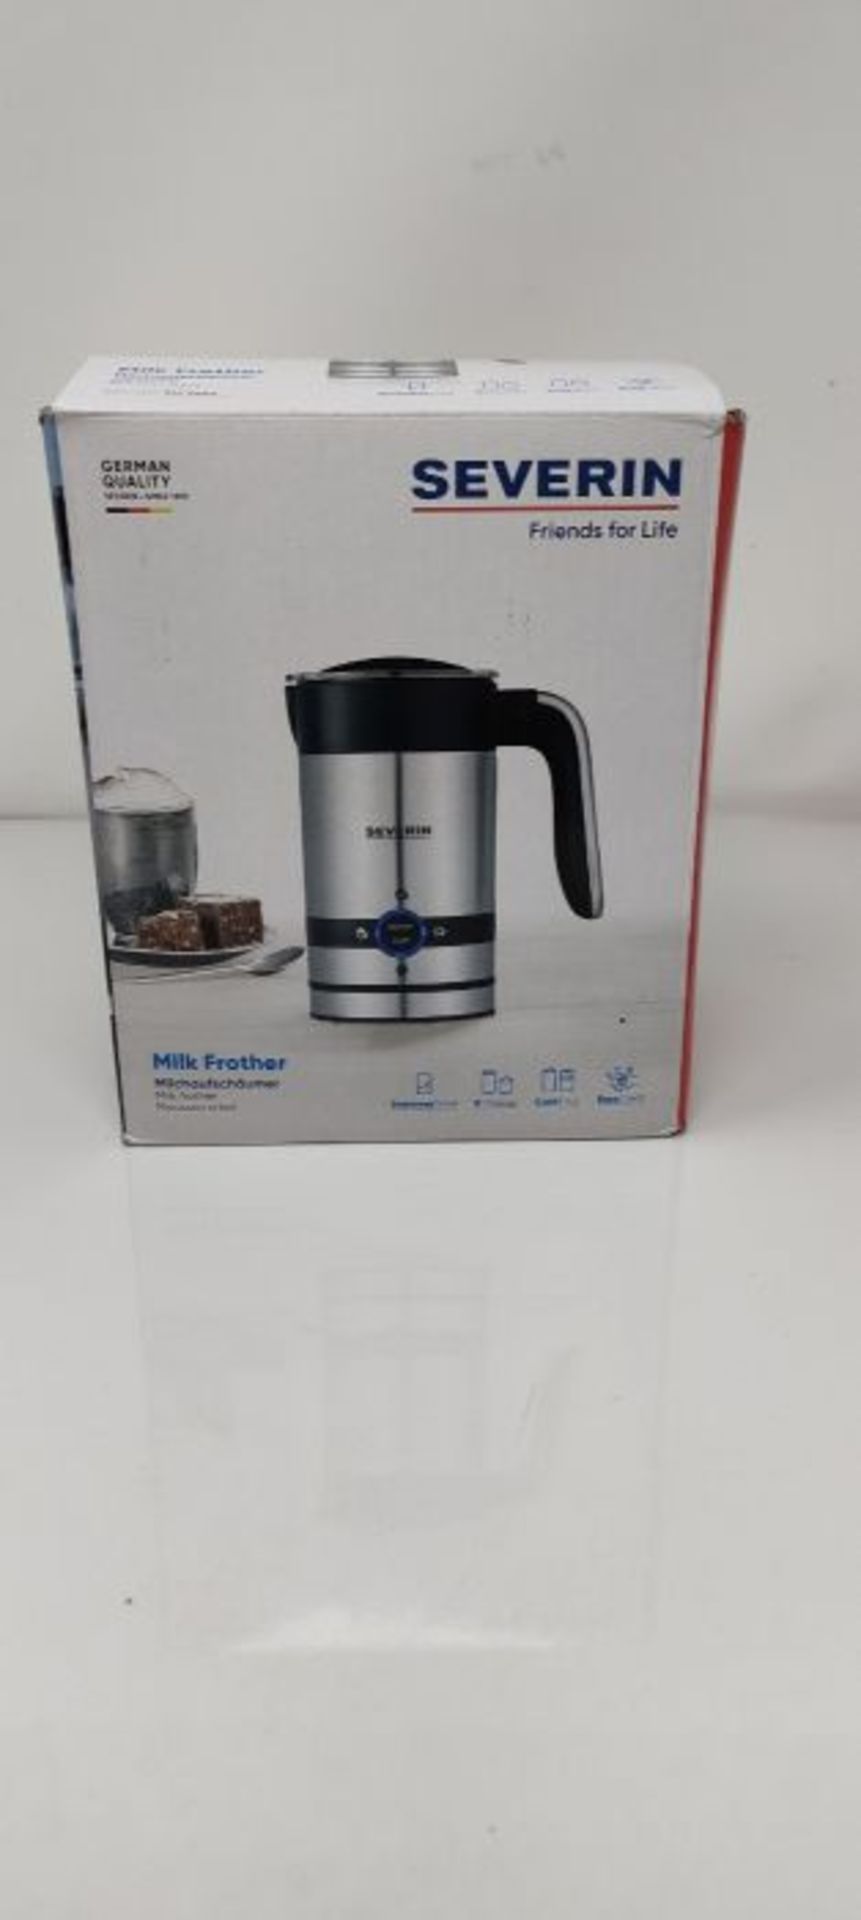 Severin 3584 Milk Frother, Stainless steel, 450 W, 200 milliliters - Image 2 of 3